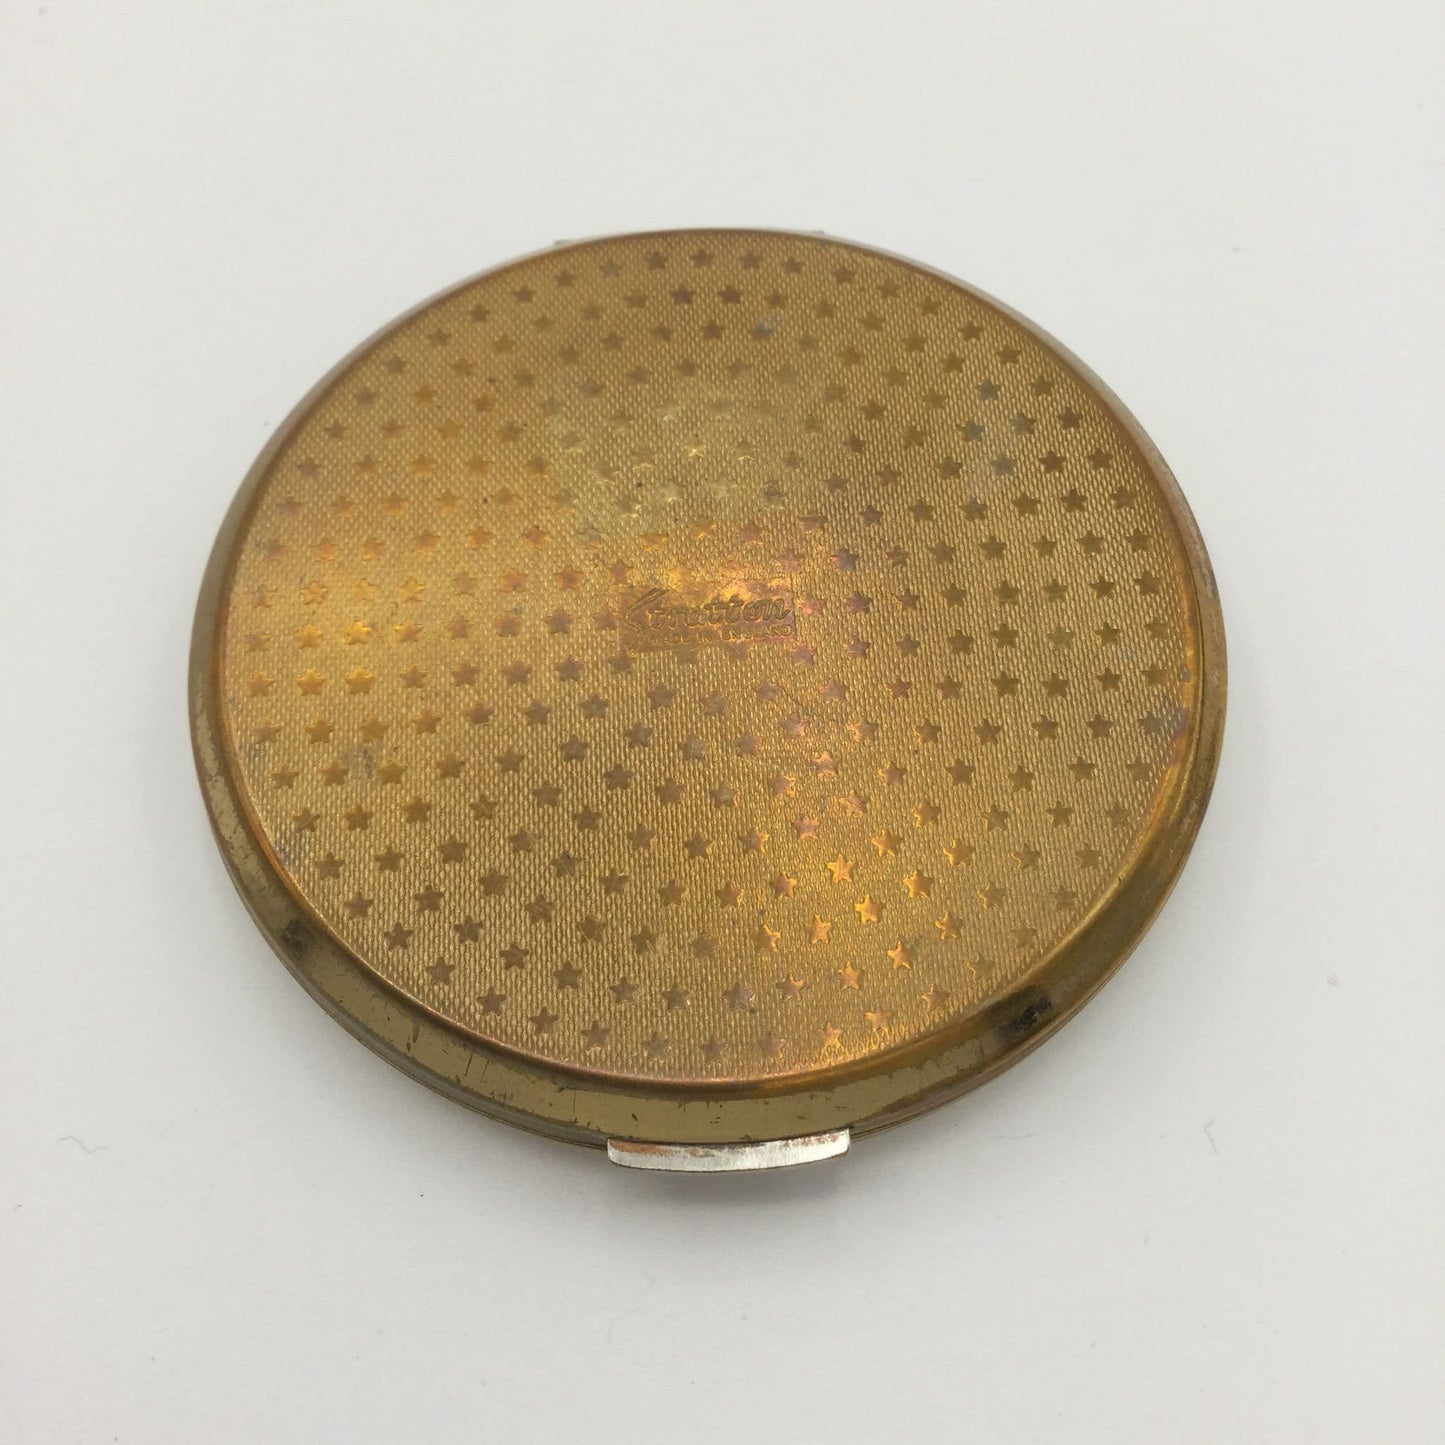 Vintage 1960s Stratton Powder Compact, Gold and Floral Design